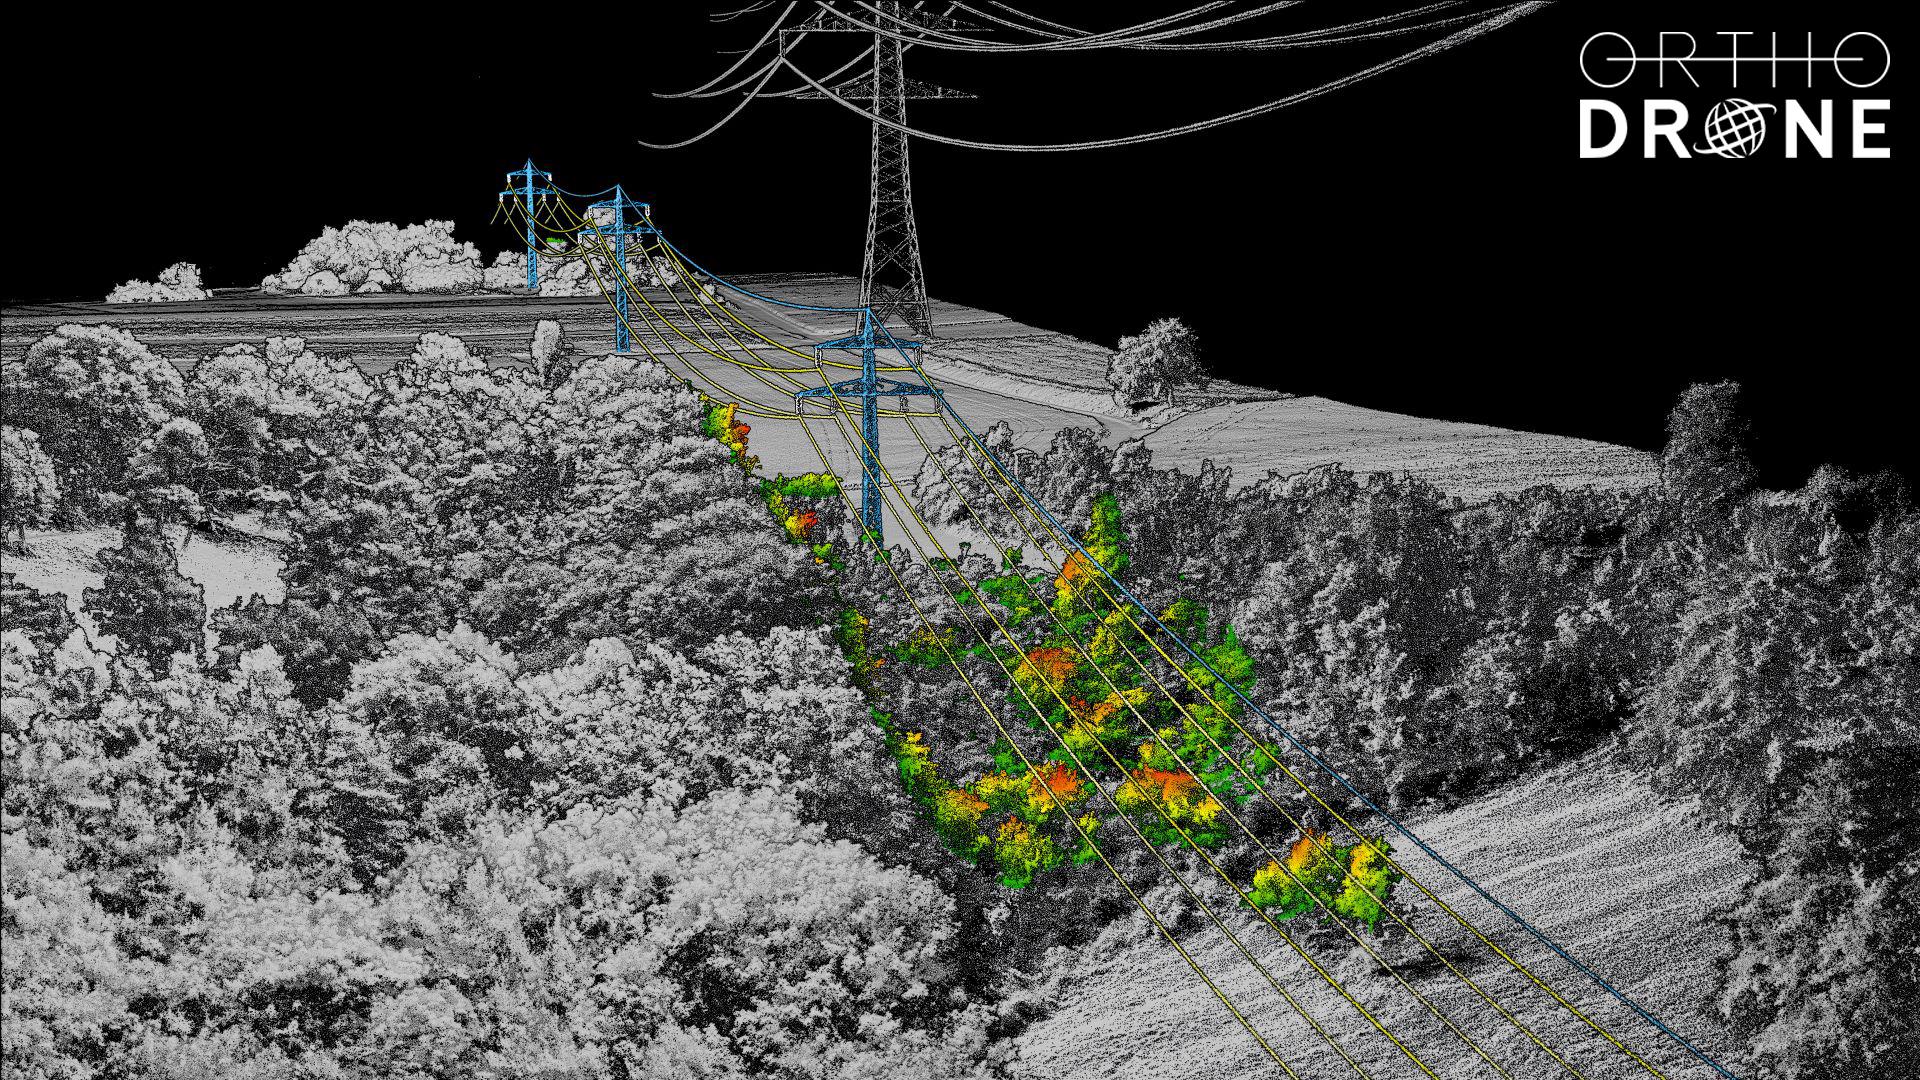 Orthodrone ULS point cloud of uncrewed lidar powerline survey, clearly visible powerlines, comprehensive vegetation analysis